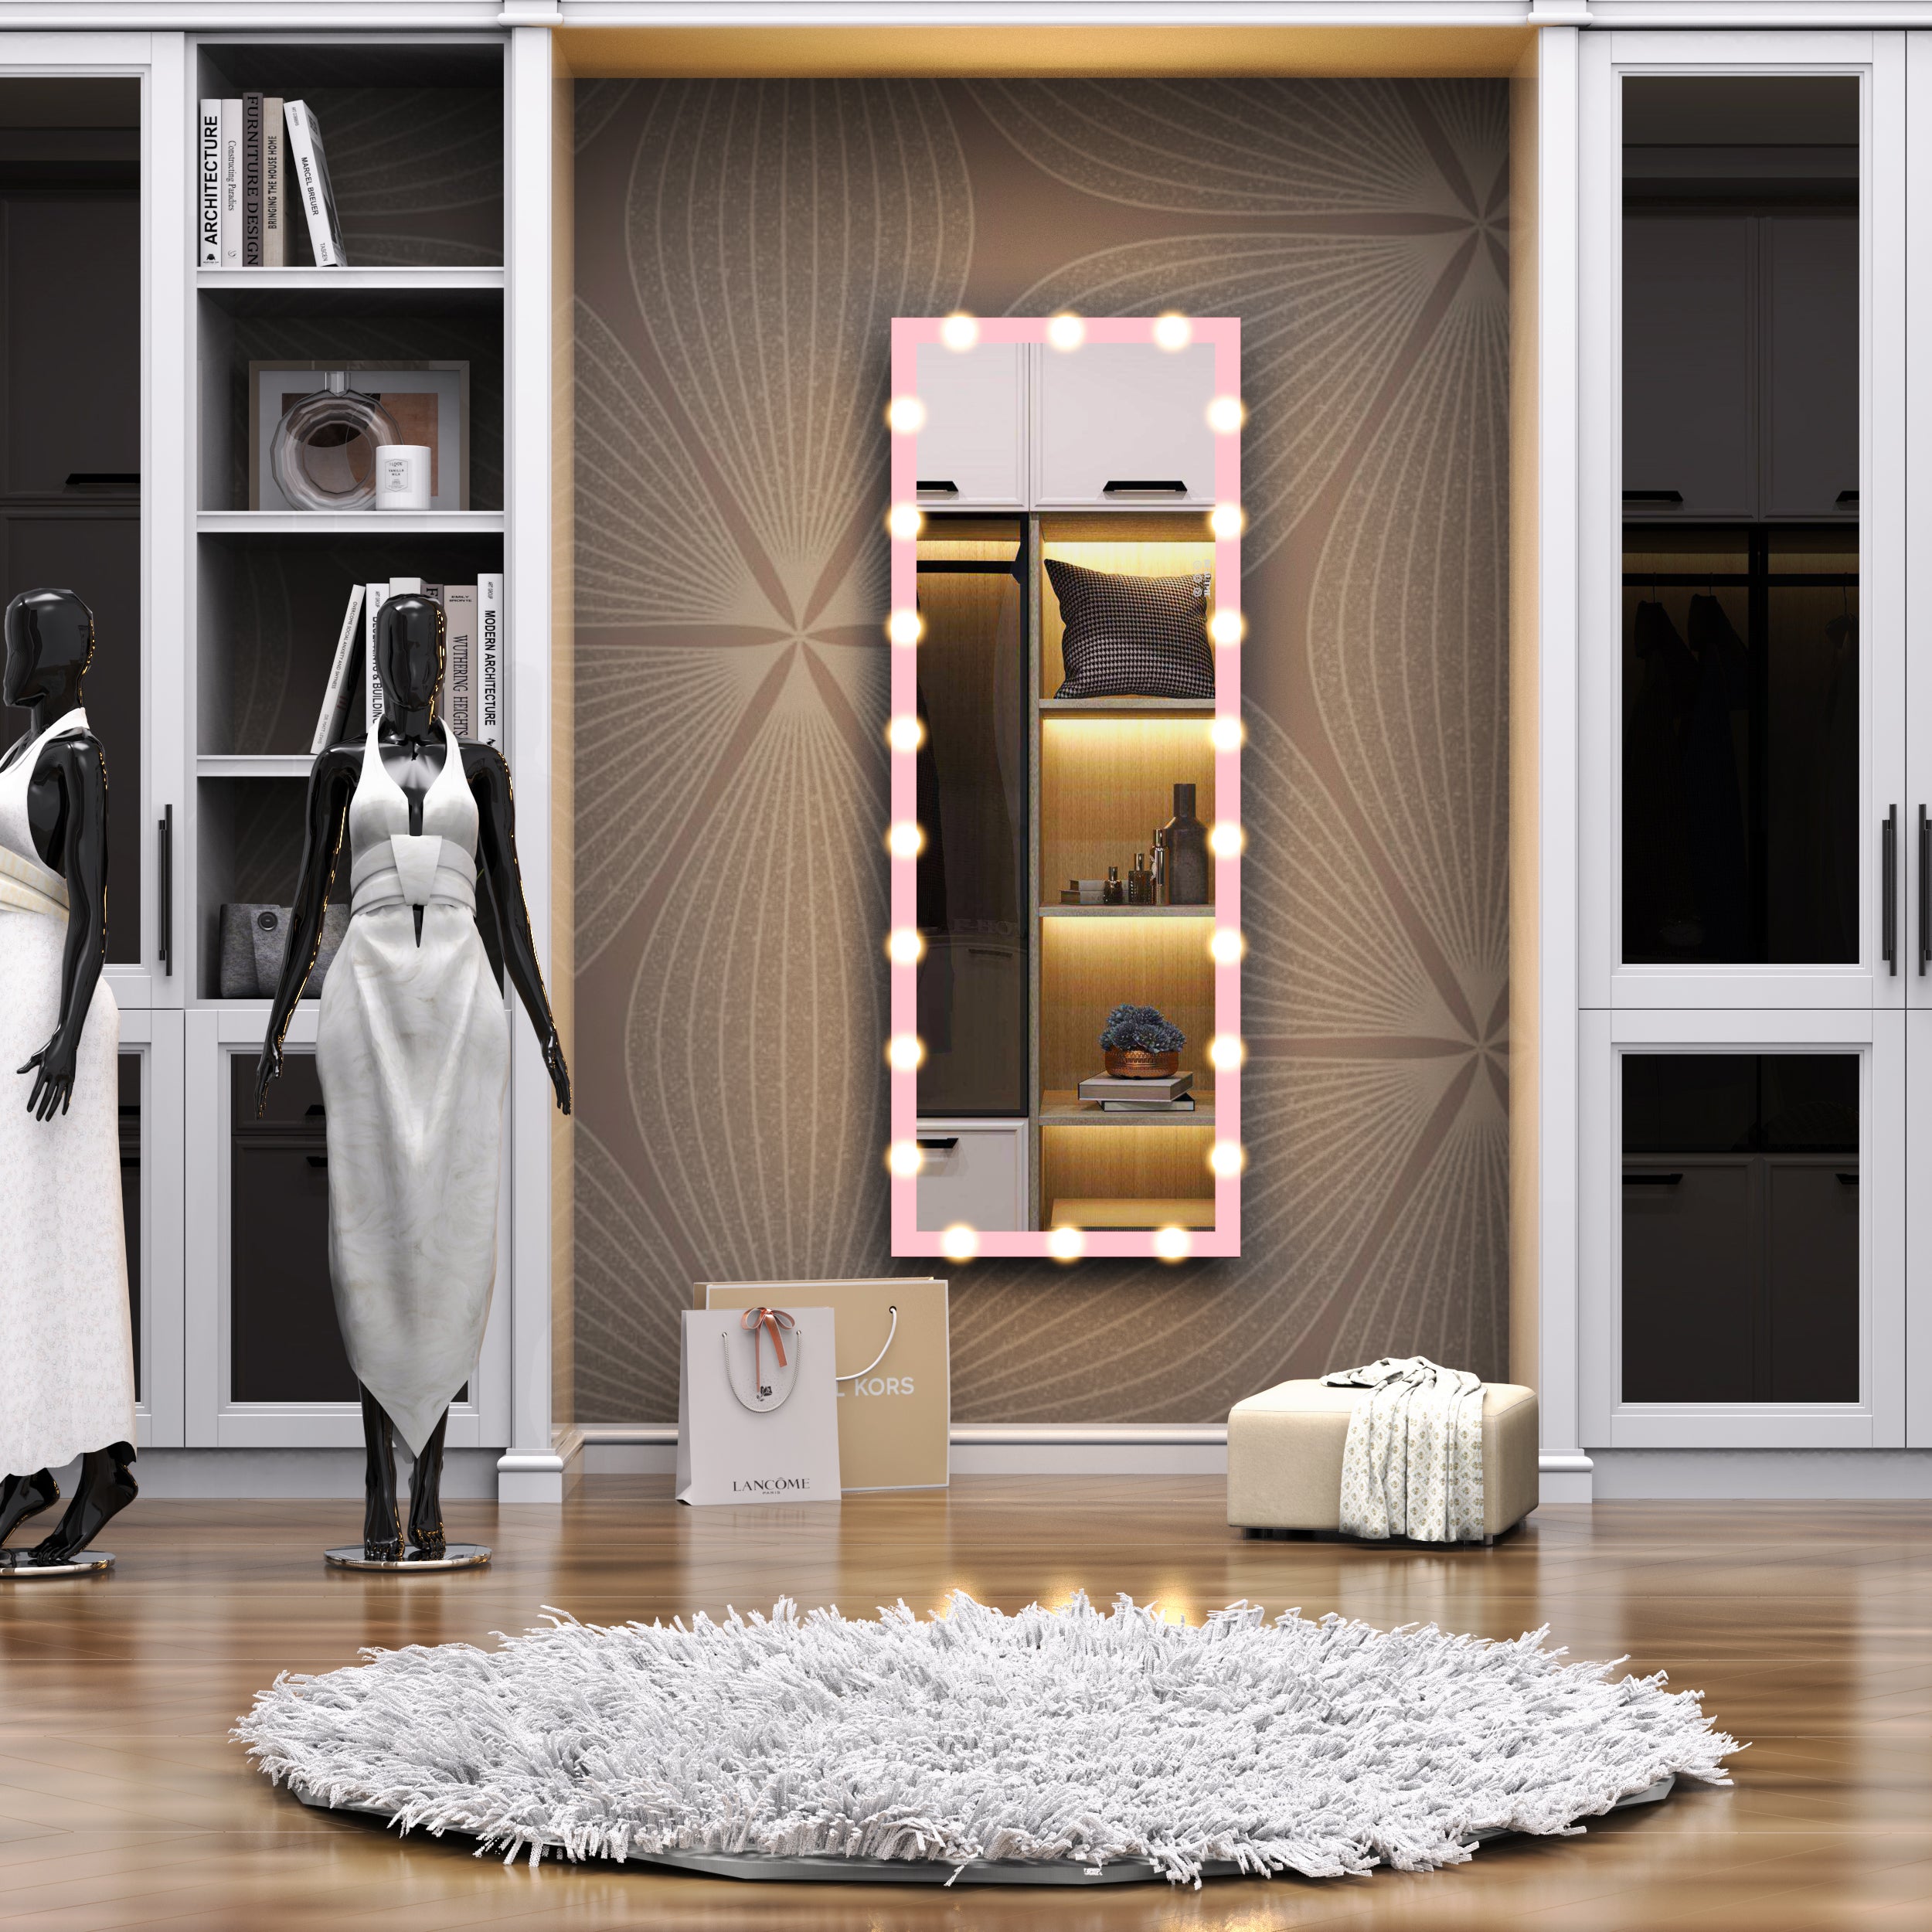 Hollywood Full Length Mirror with Lights Full Body Vanity Mirror with 3 Color Modes Wall Lighted Standing Floor Mirror for Dressing Room Bedroom Hotel Touch Control Pink 62.6"x23.3"